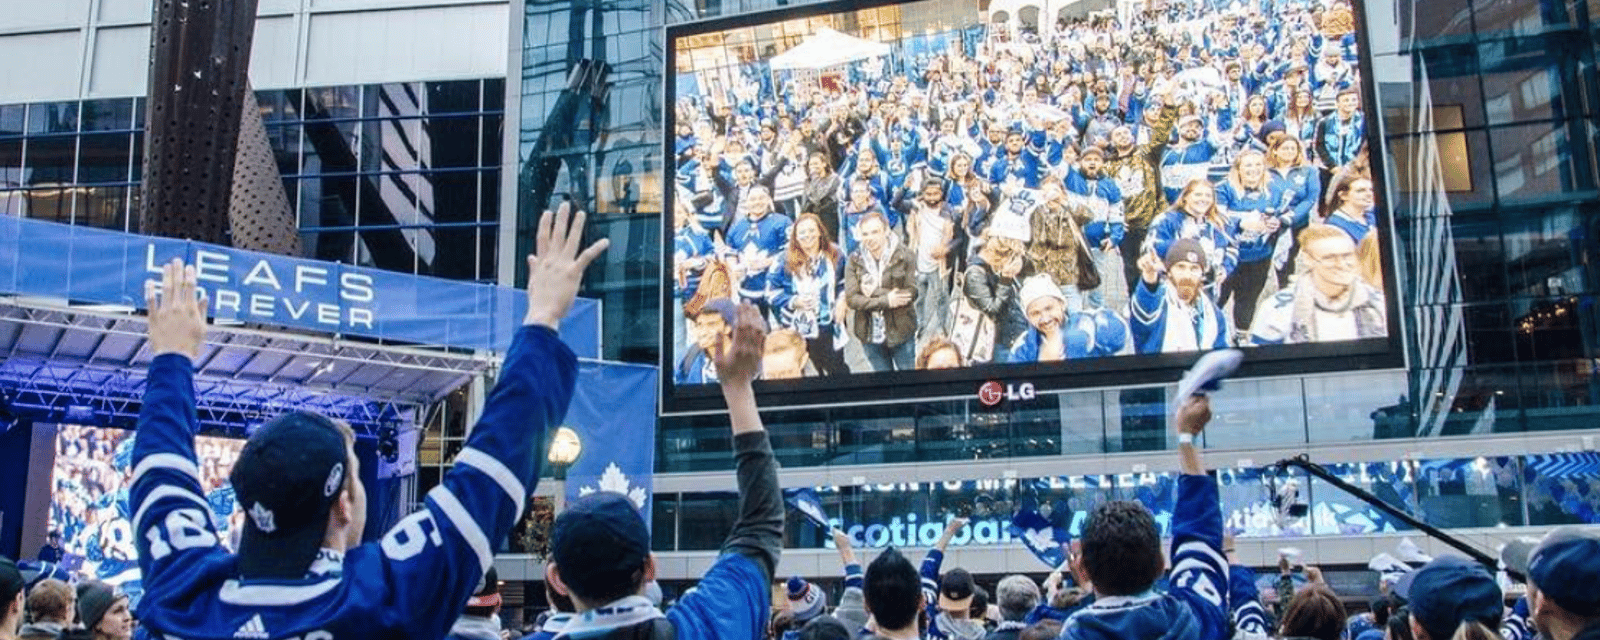 Fans furious at Leafs for insensitive goal song 